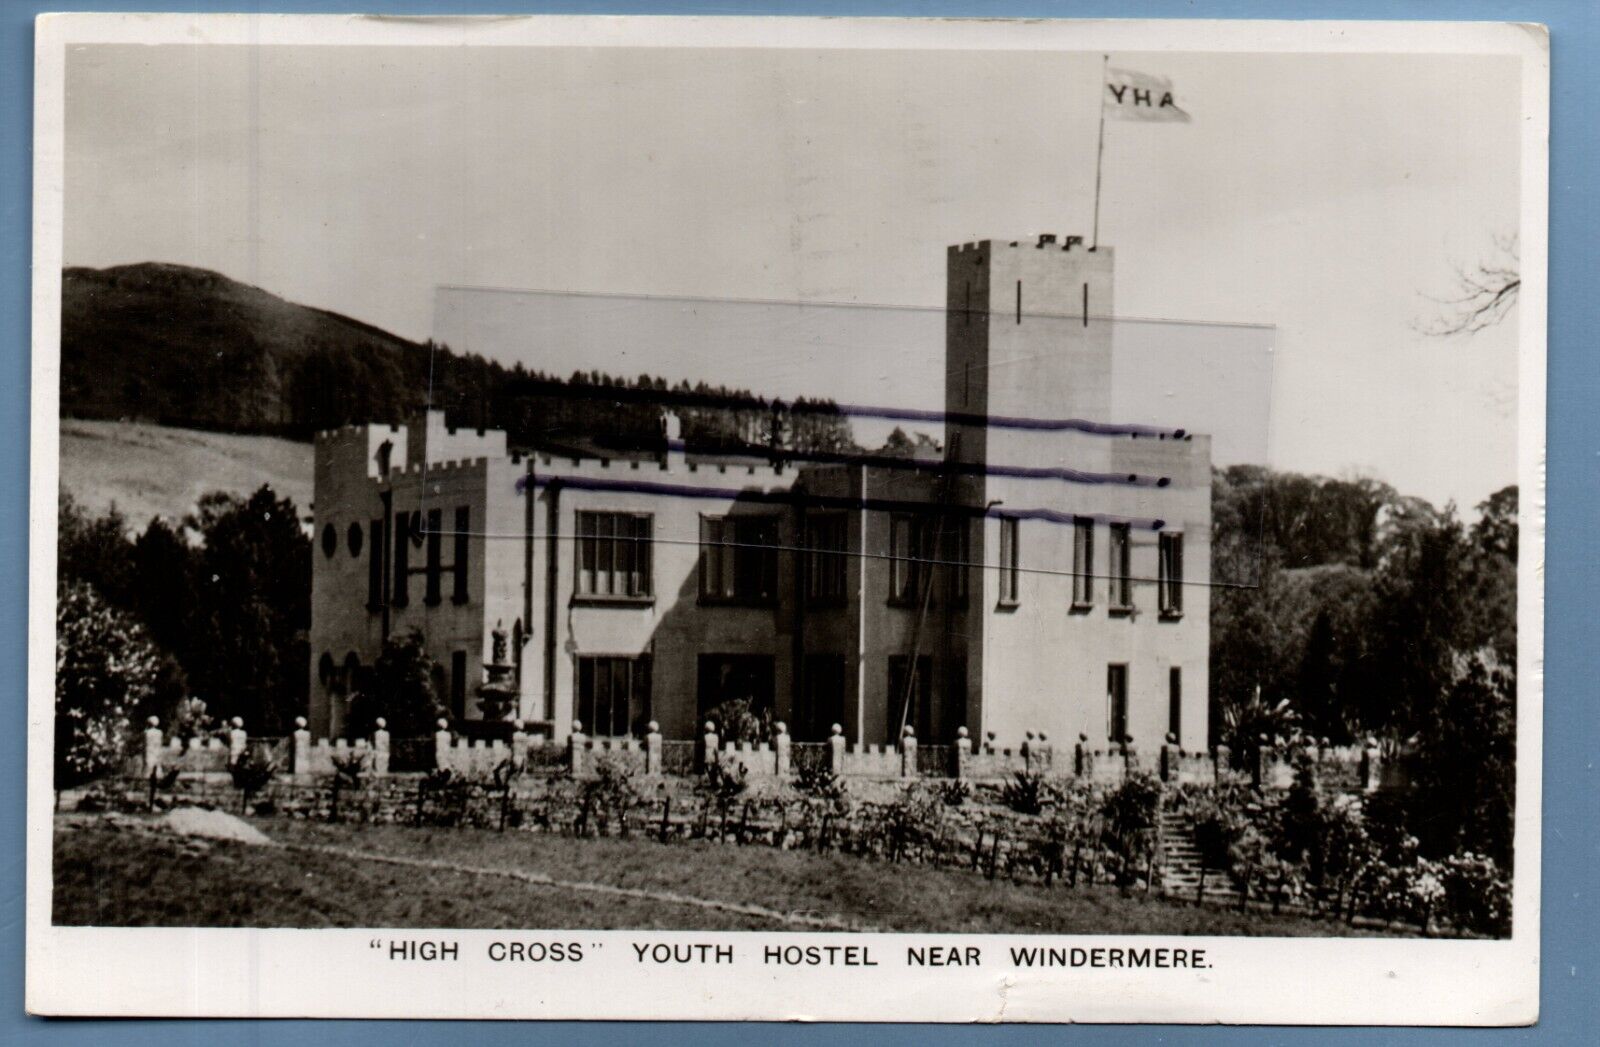 House Clearance - 1946 POSTCARD HIGH CROSS YOUTH HOSTEL CUMBRIA NR WINDERMERE TROUTBECK AMBLESIDE